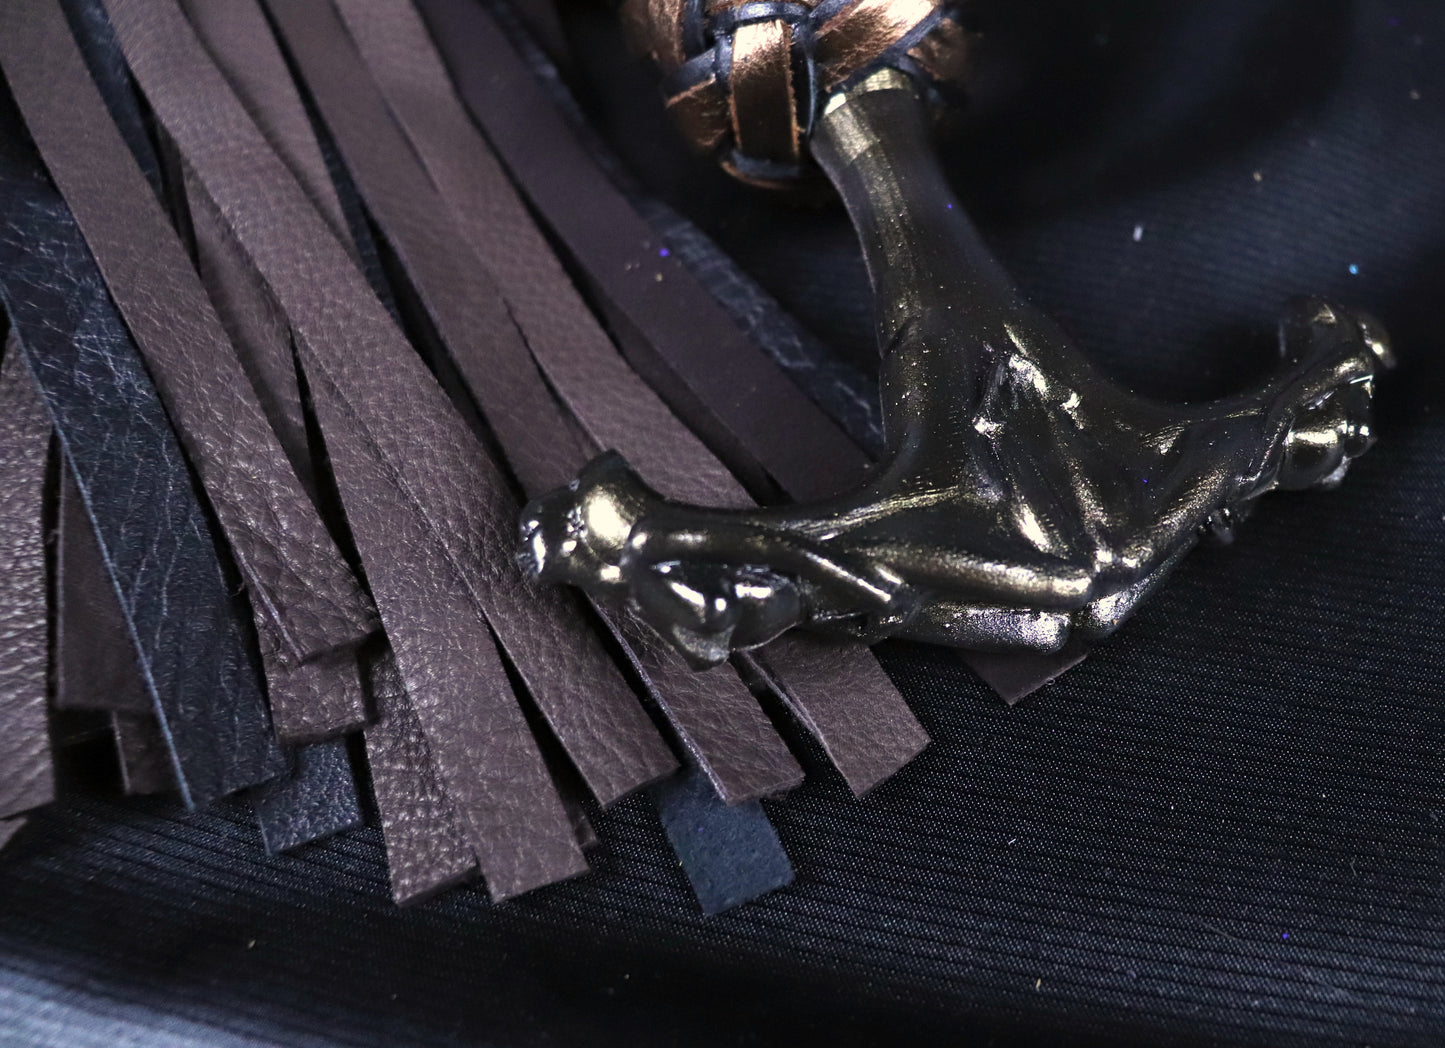 The Gemini Handle Floggers with Black Velvet Leather tails